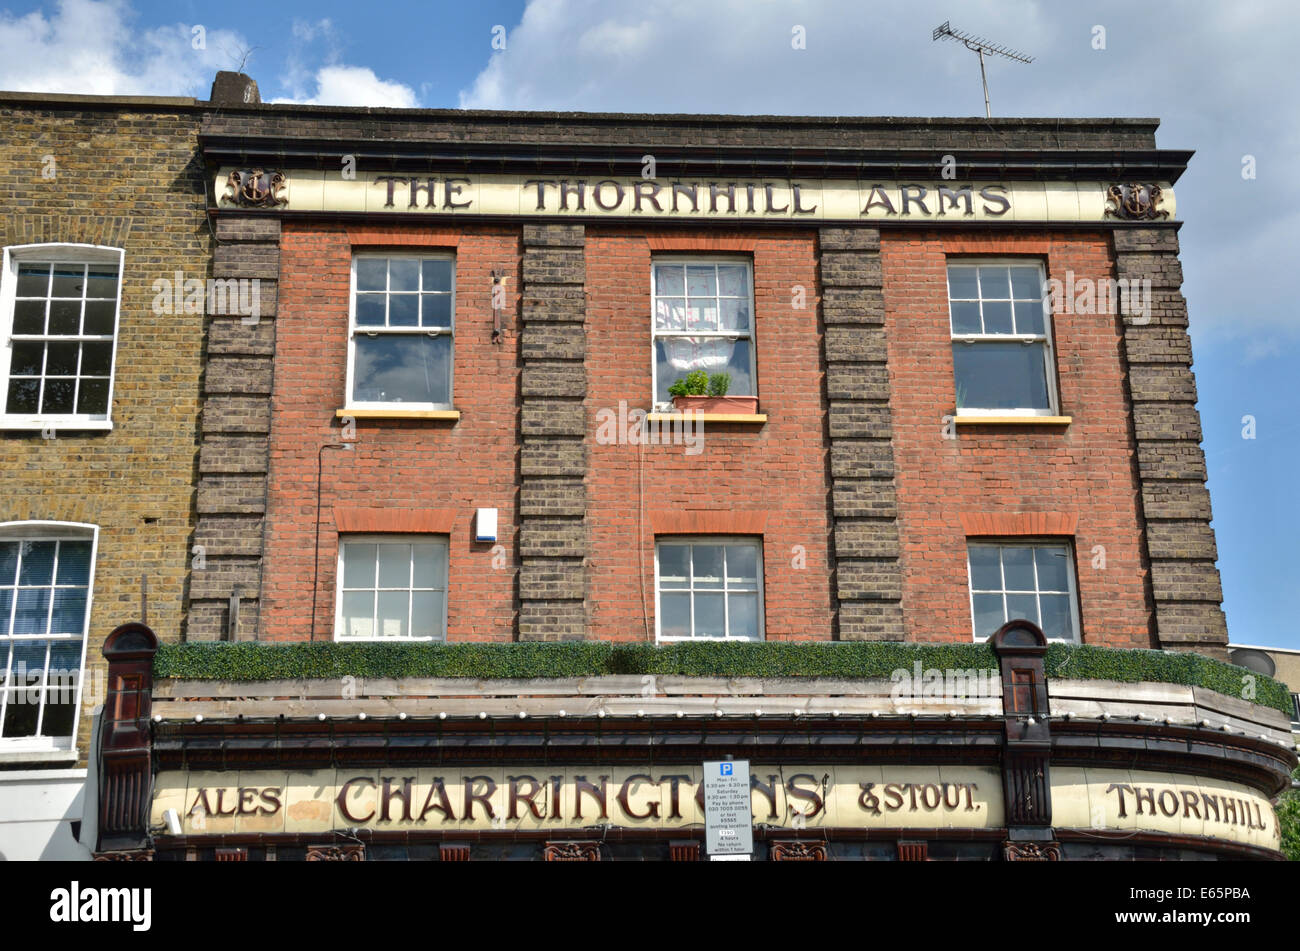 The Thornhill Arms pub in Caledonian Road, London Stock Photo